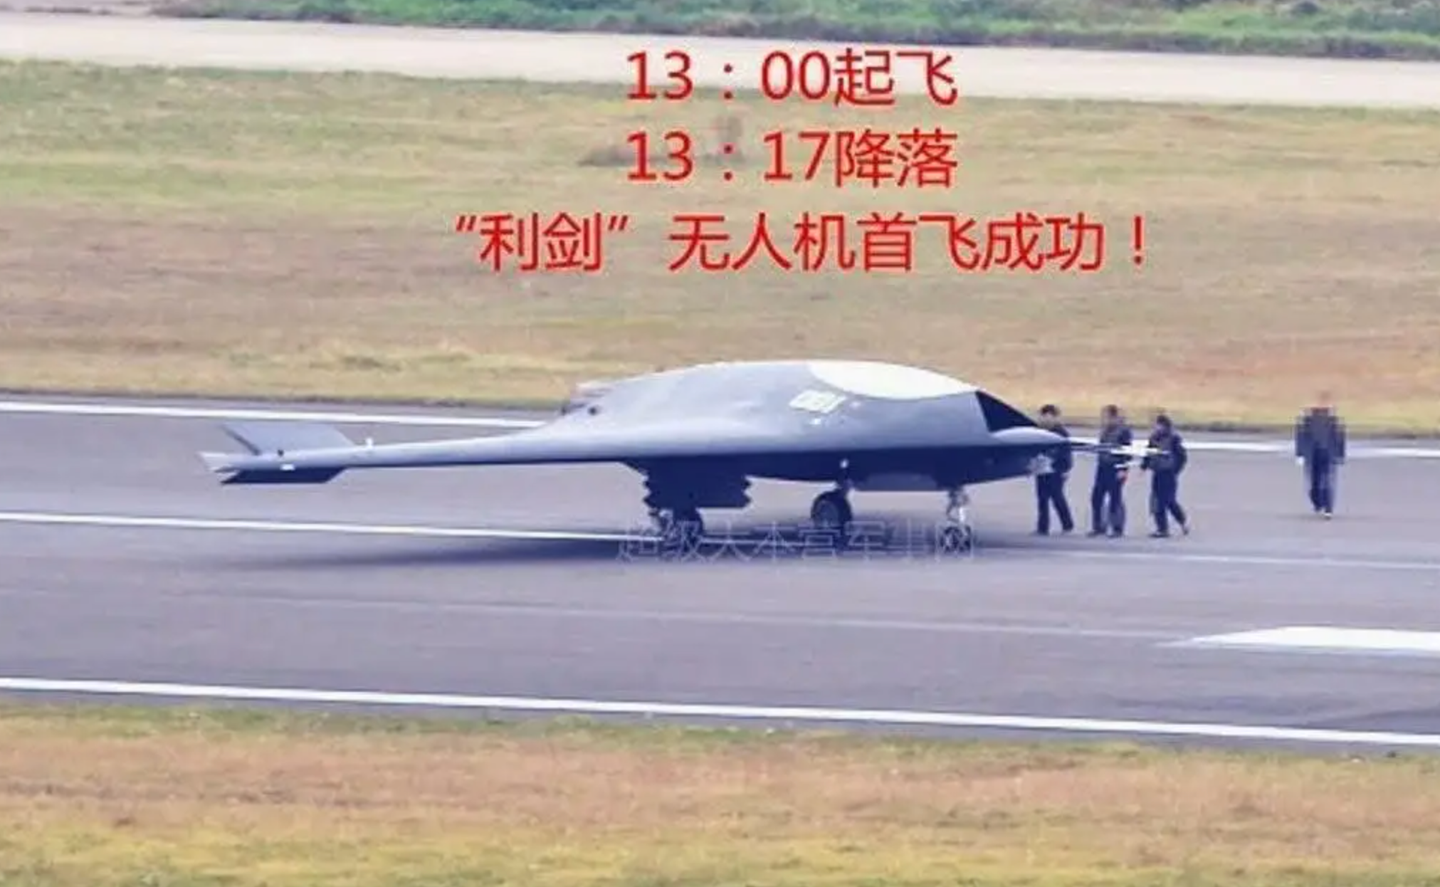 A GJ-11 prototype during early testing. The aircraft has since been <a href=https://www.thedrive.com/the-war-zone/30111/china-showcases-stealthier-sharp-sword-unmanned-combat-air-vehicle-configuration target=_blank rel=noreferrer noopener>considerably refined</a> in terms of its low-observability airframe, addressing the completely exposed engine exhaust, for example. <em>Chinese internet</em>